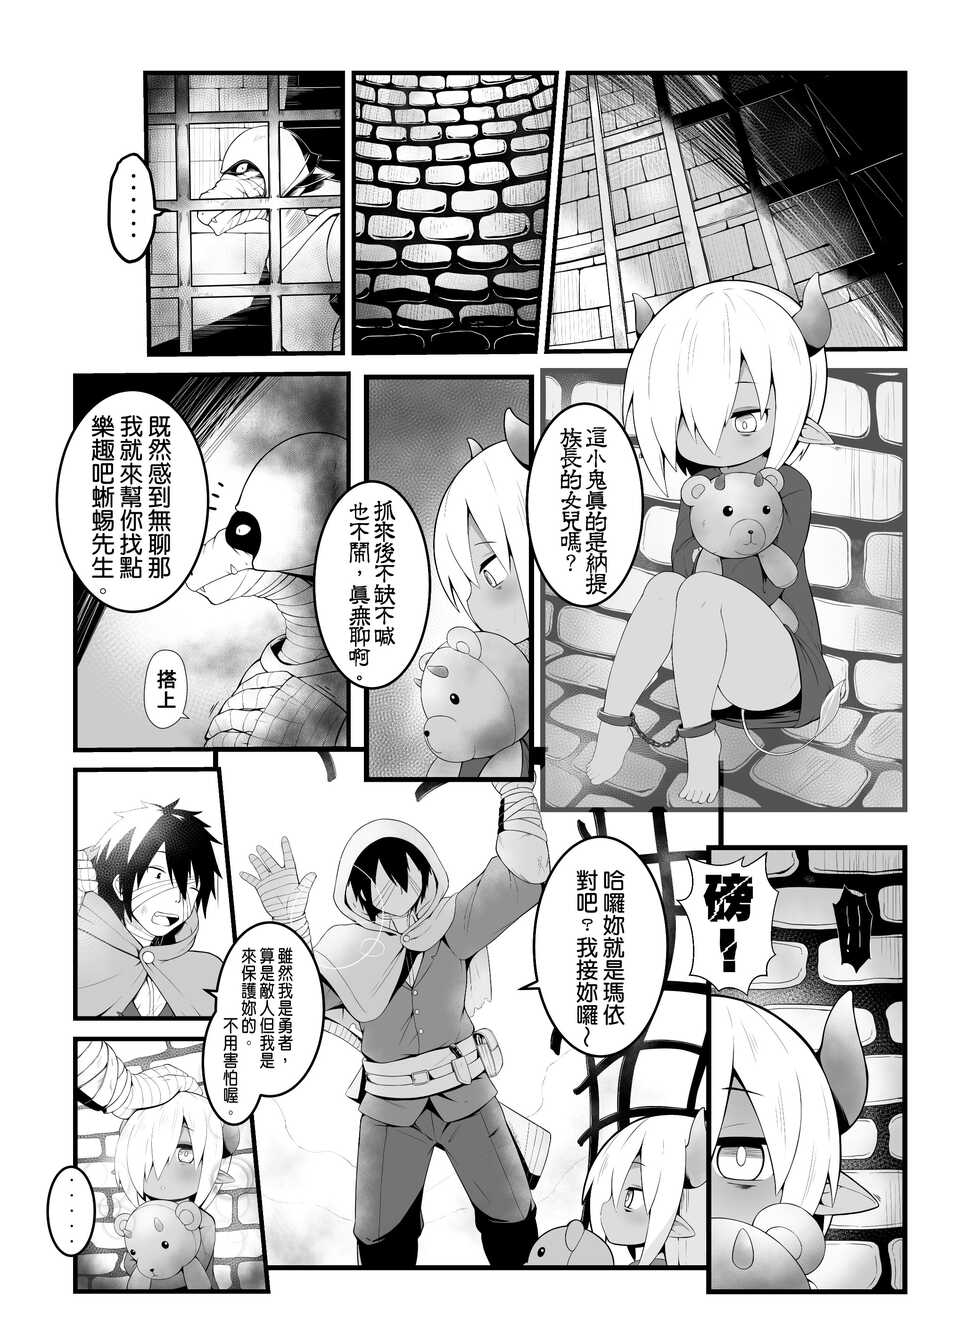 [KAGO] Hero's cow maid hypnotization [Chinese] - Page 2